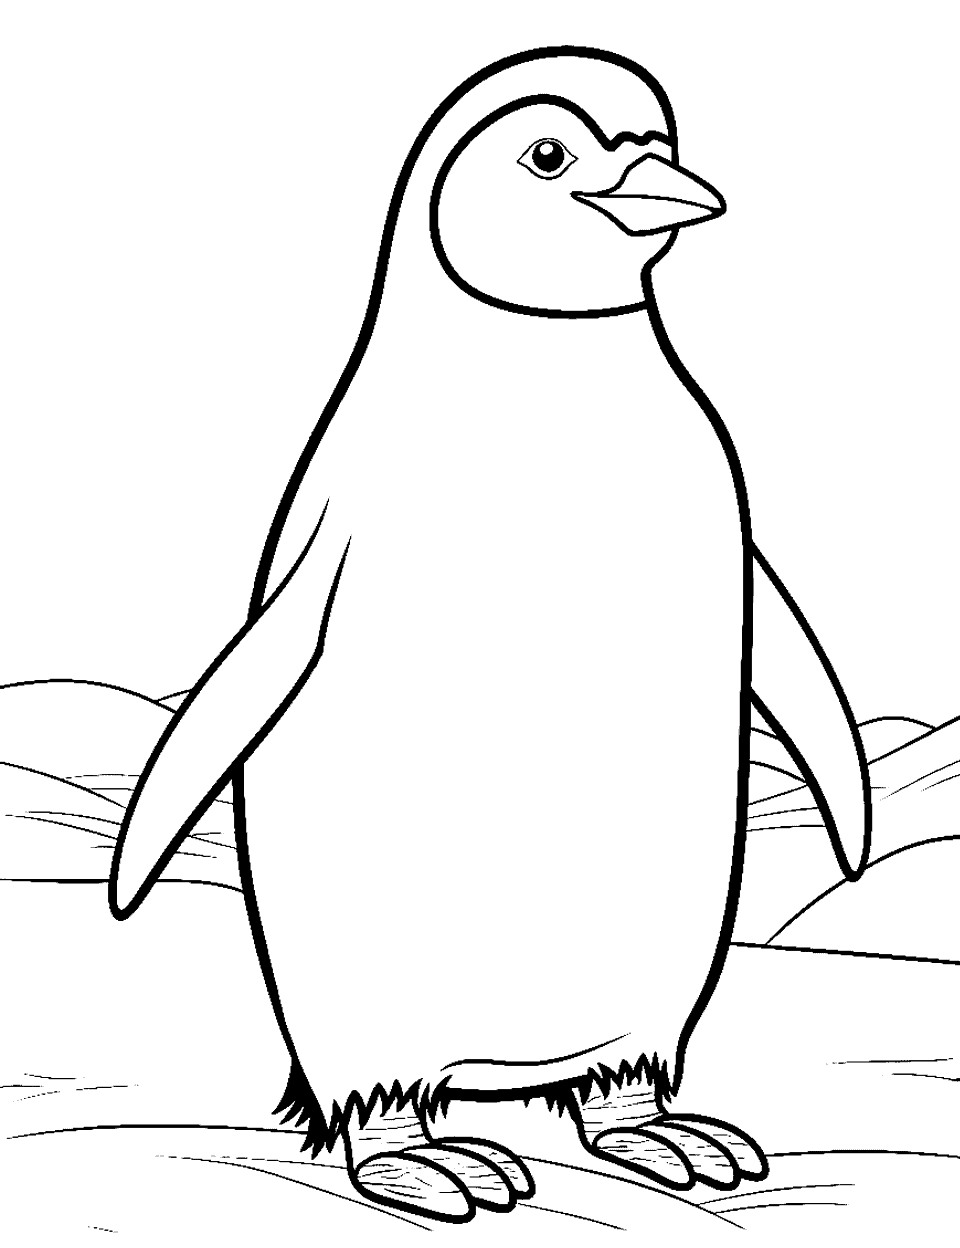 How to draw a penguin with a pencil step-by-step drawing tutorial